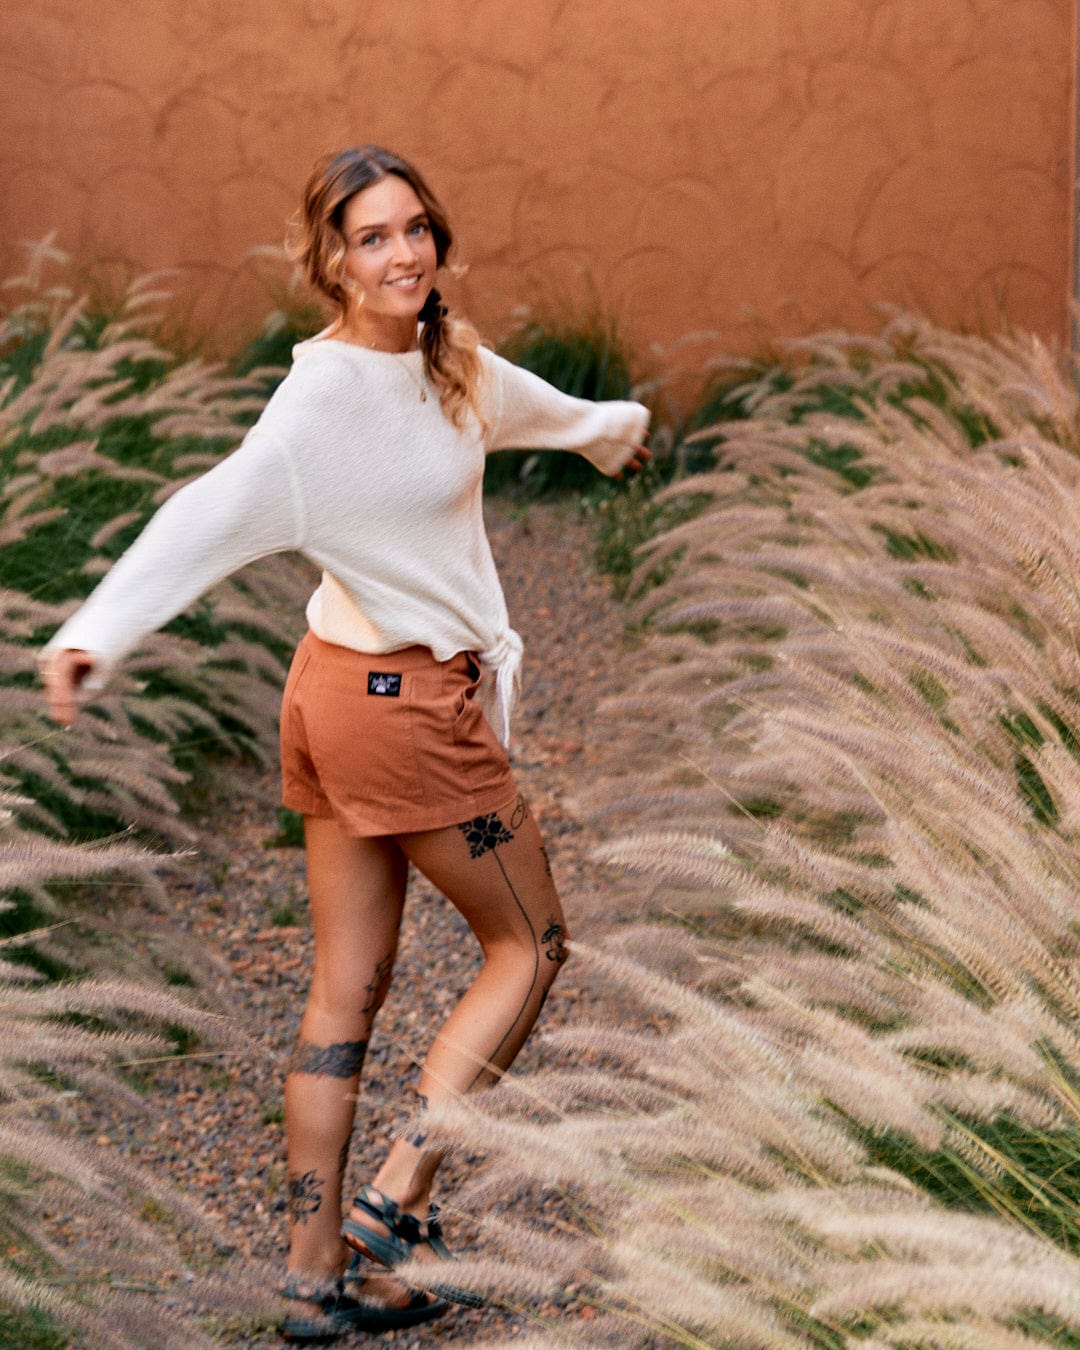 A woman with tattoos, wearing a Saltrock Beachcomber - Womens Tie Waist Jumper in Cream and brown shorts, playfully poses among tall grasses against a peach-colored wall.